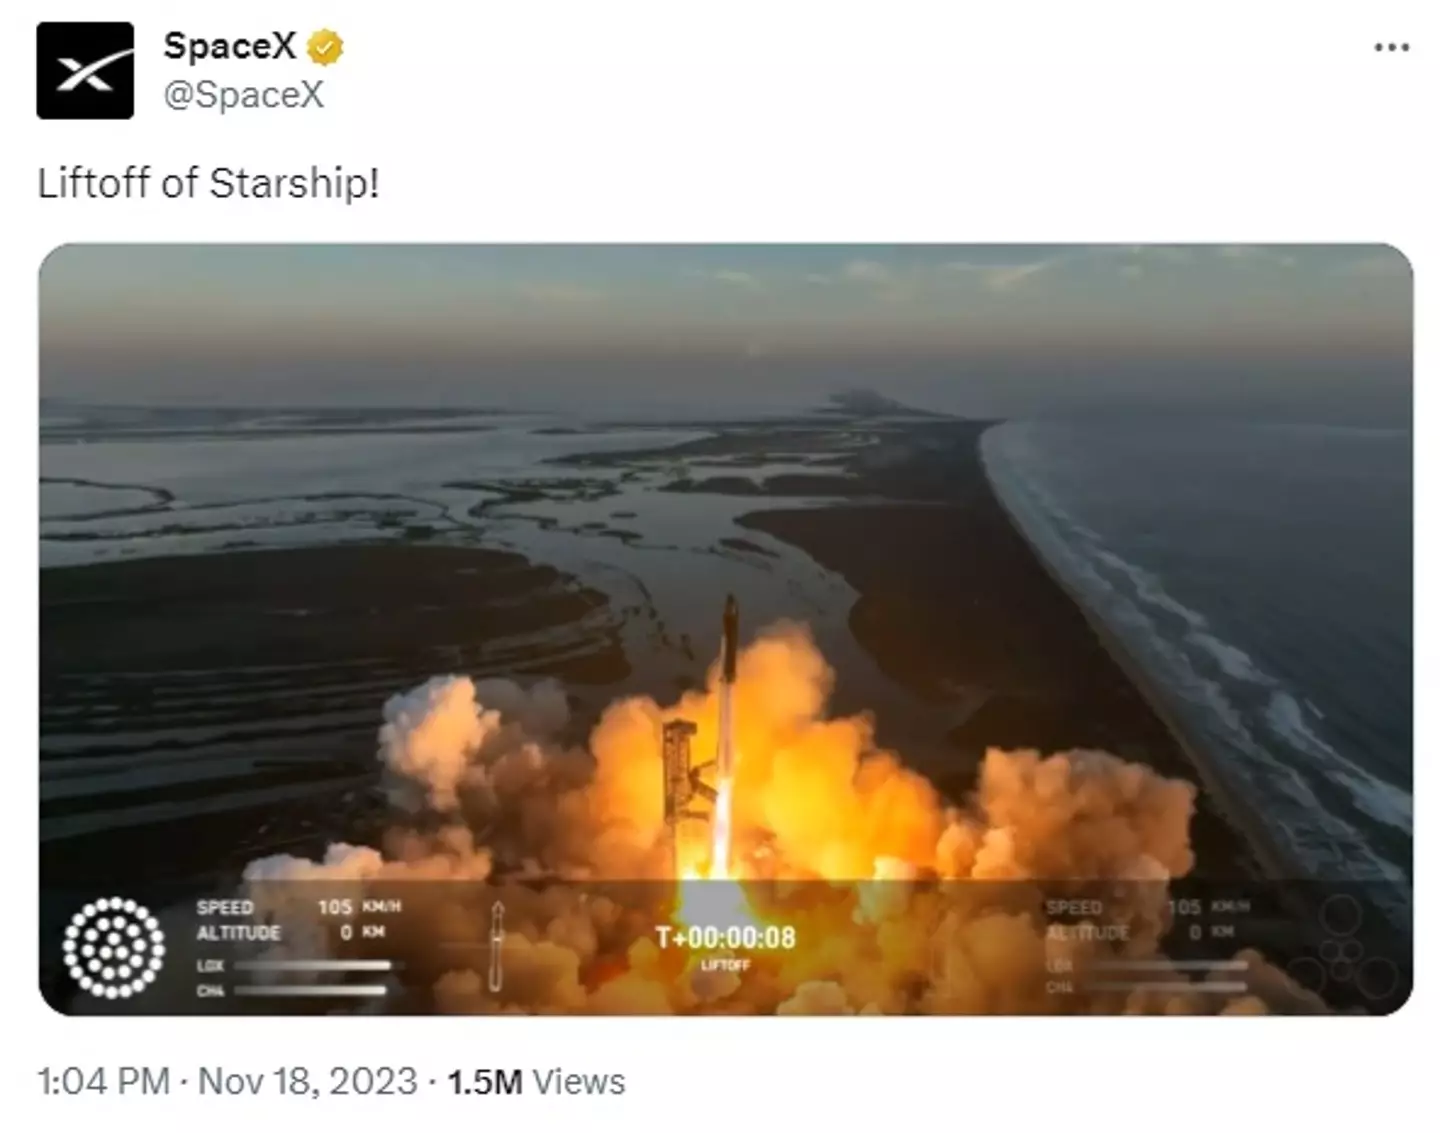 SpaceX Twitter